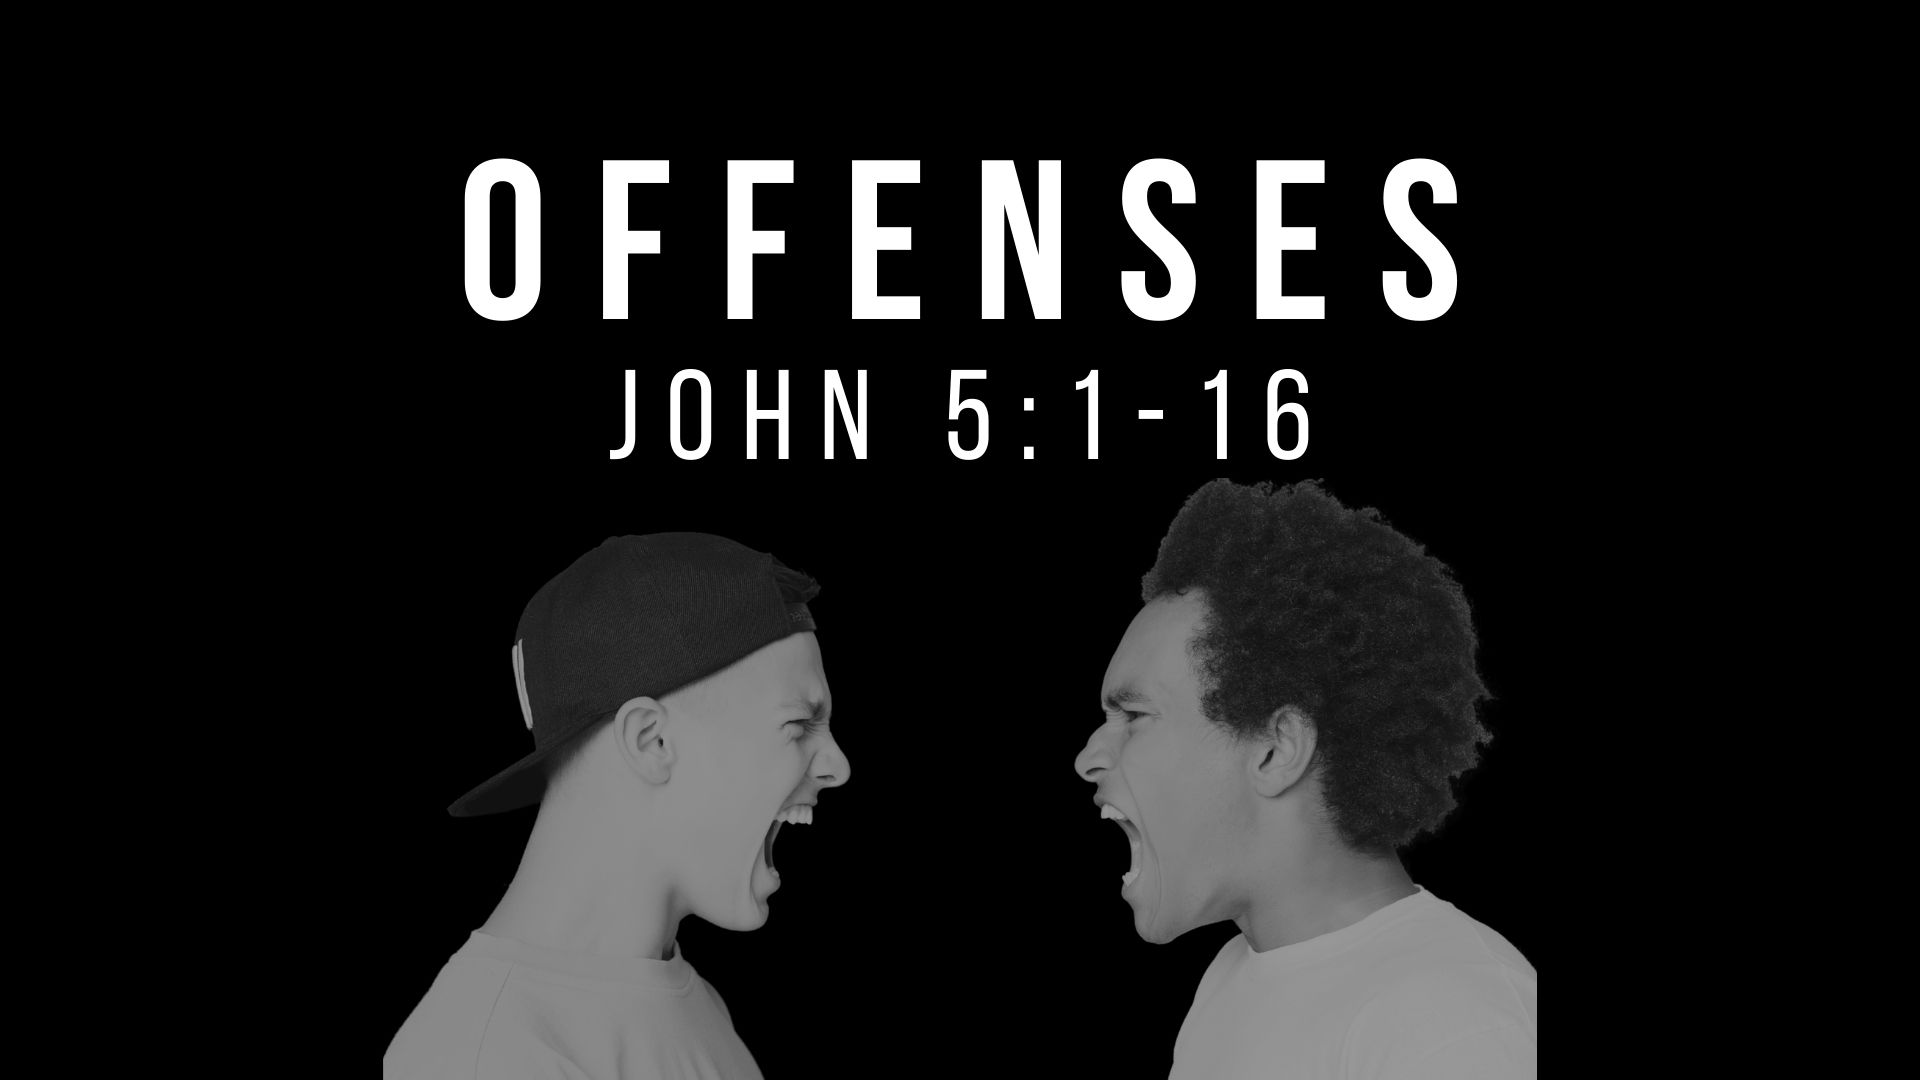 OFFENSES  |  Choices: Hurt or Healed